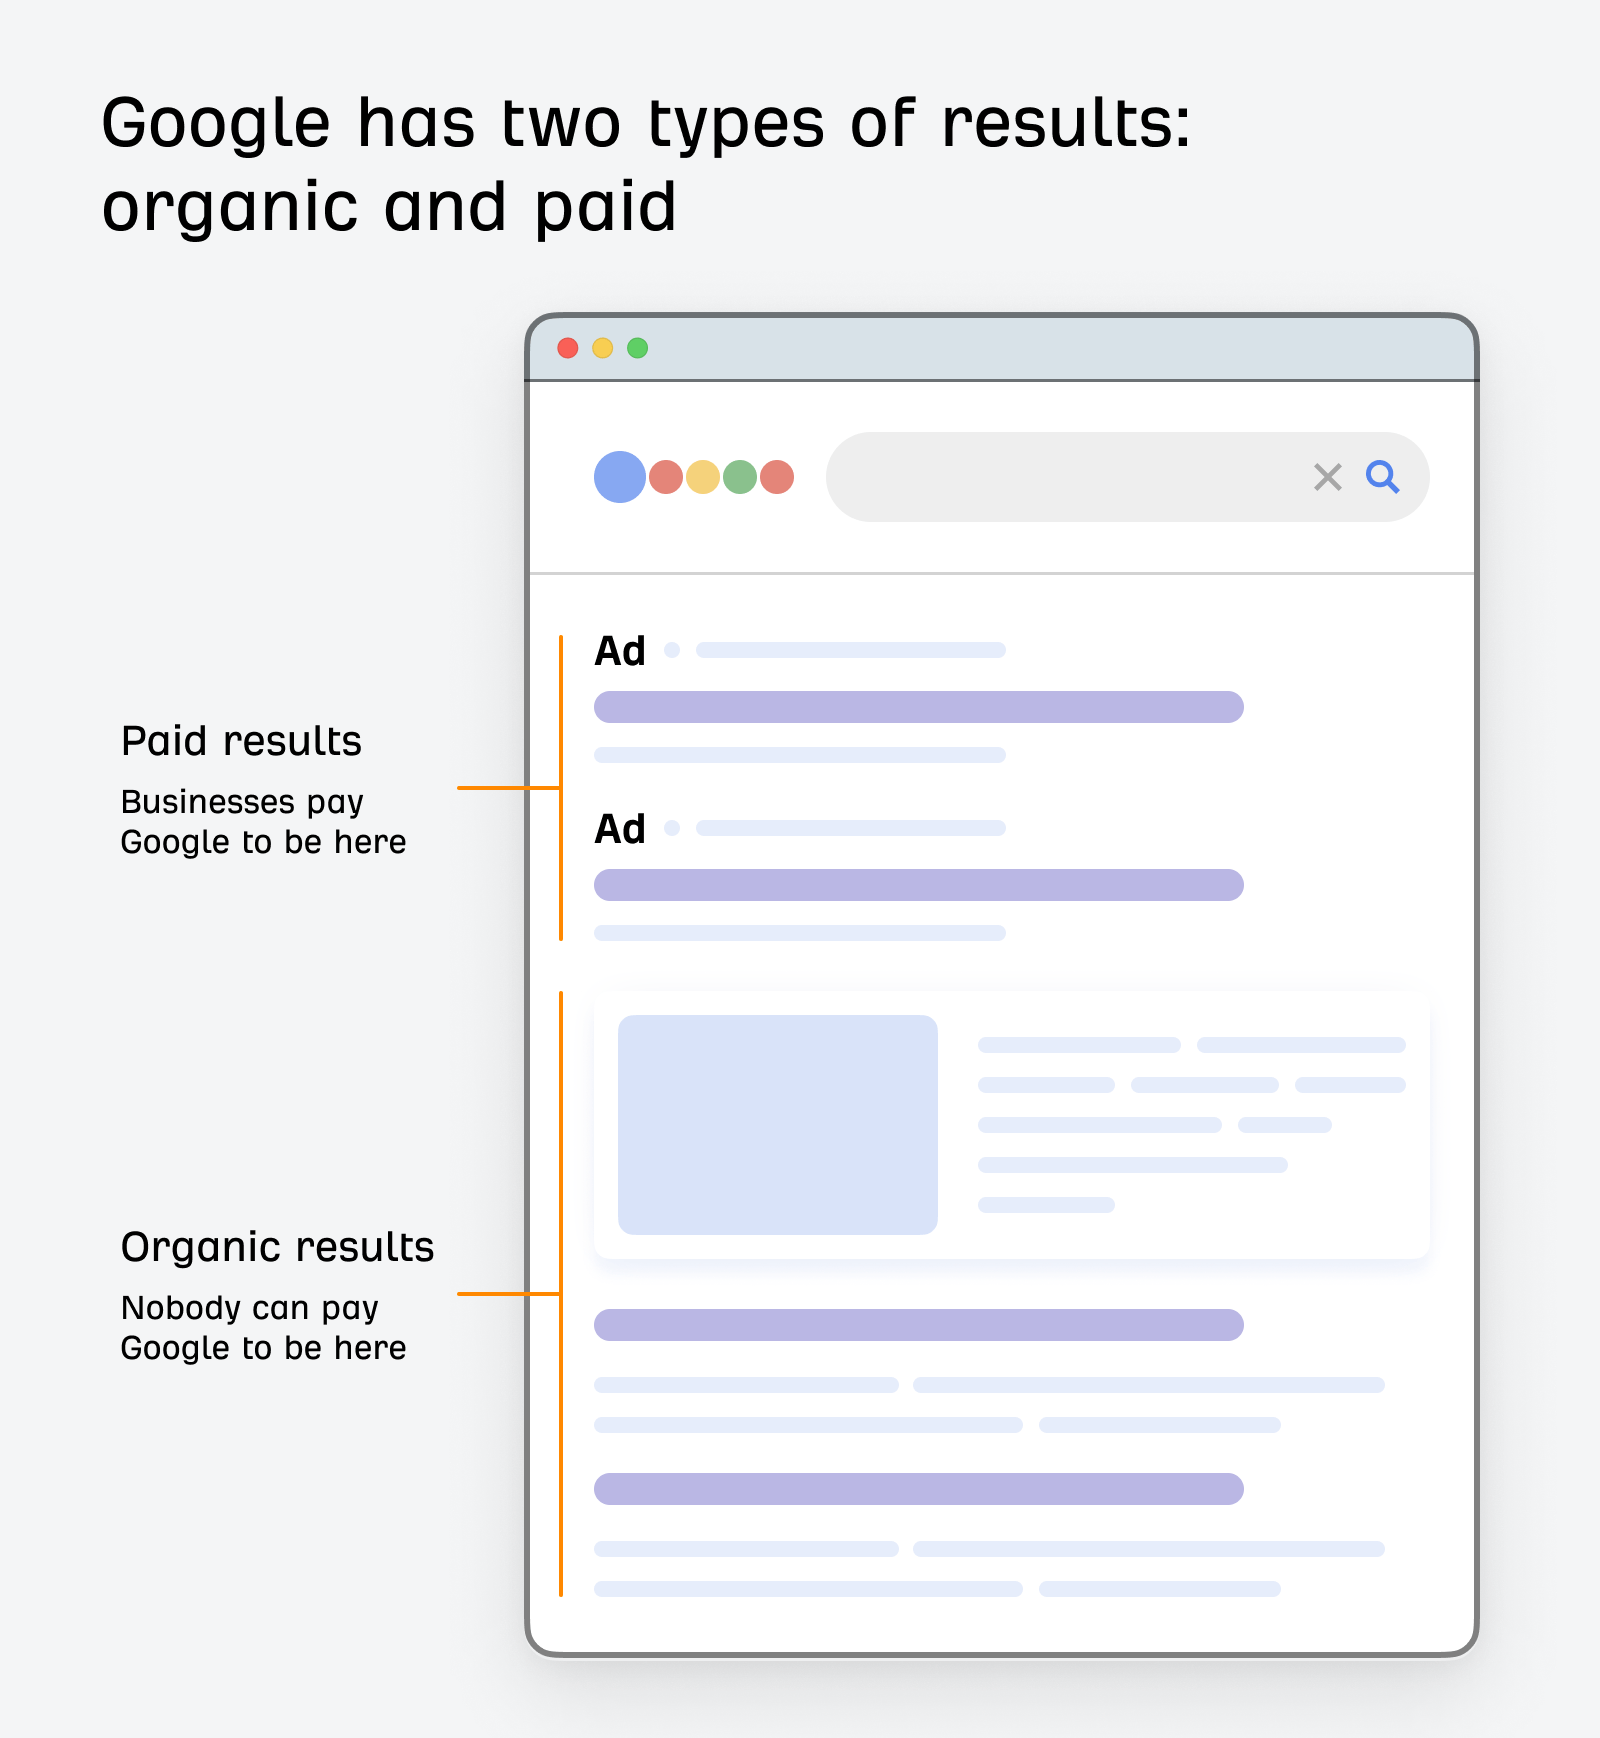 Google has two types of results: organic and paid